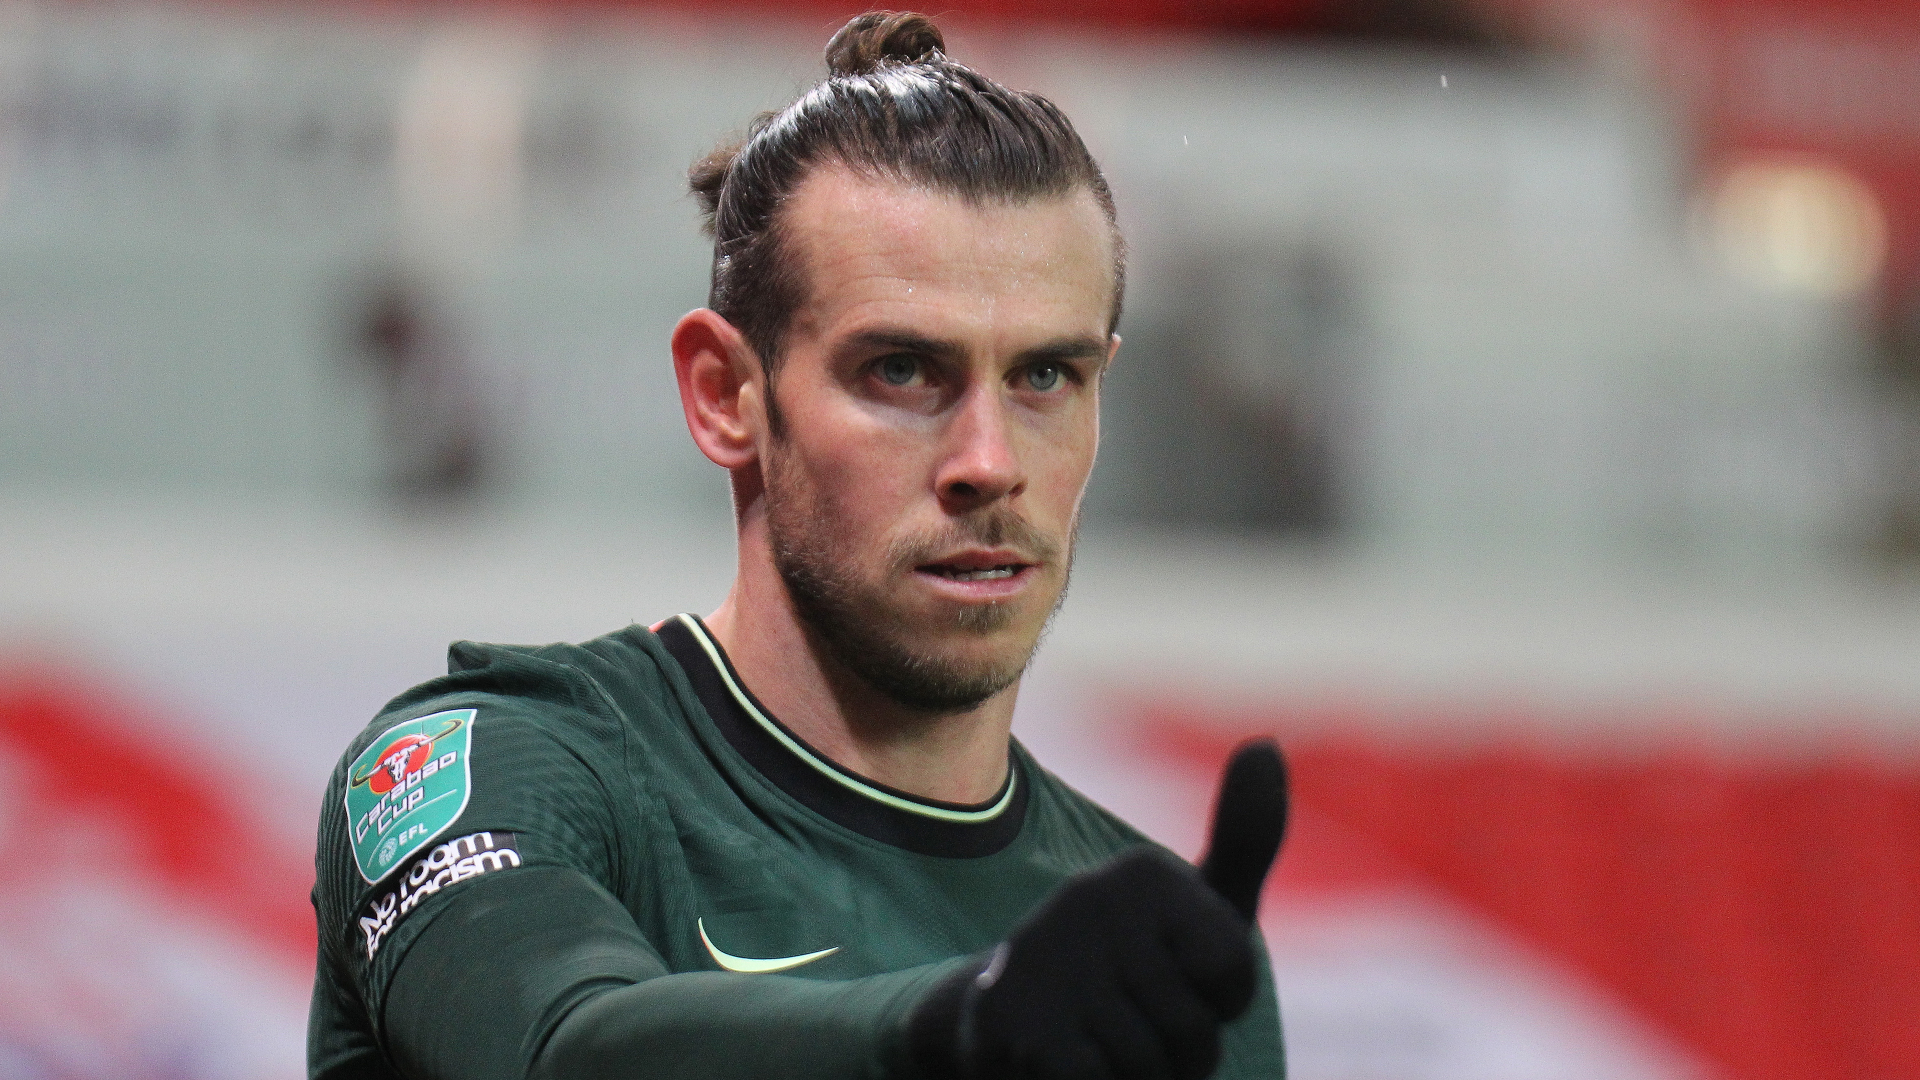 There will be no debate at Tottenham about what to do with Gareth Bale unless they can get more out of him, says Dimitar Berbatov.